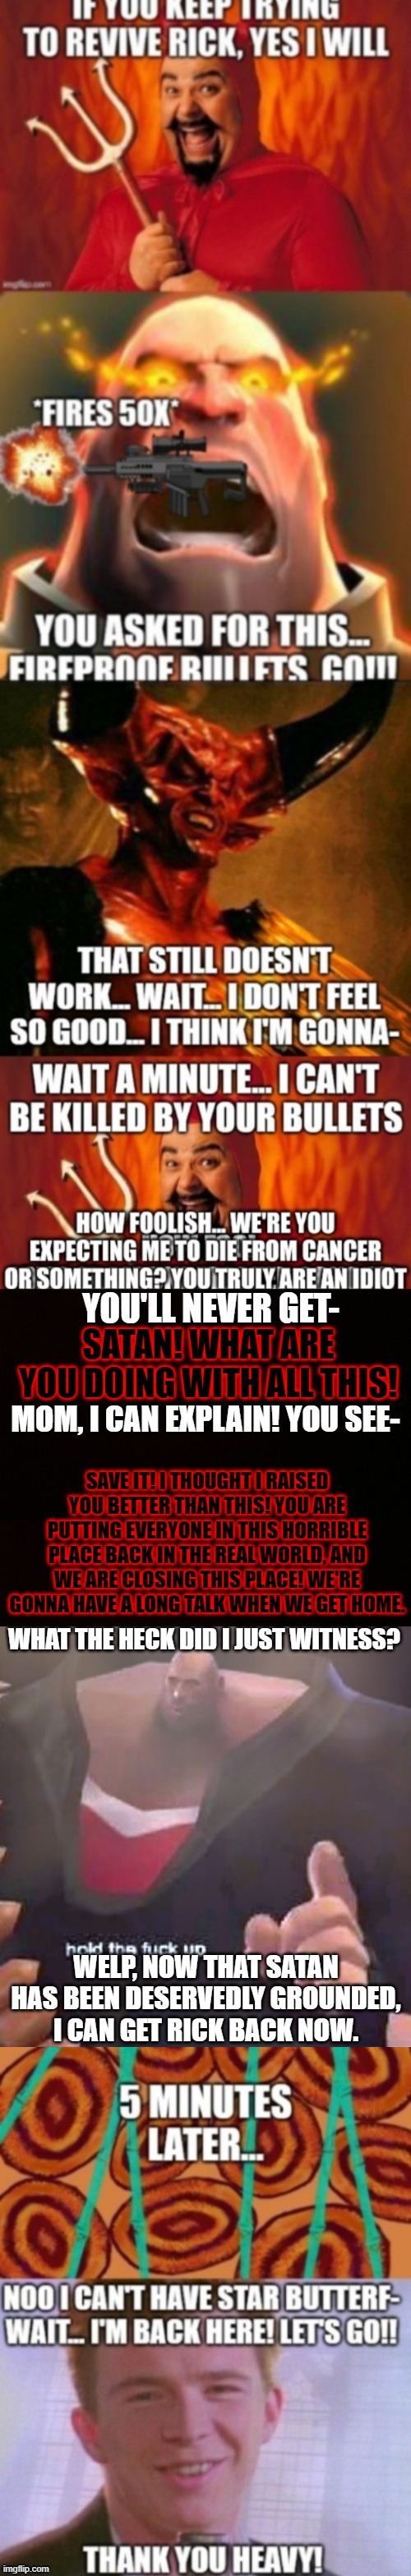 Get rekt Satan | WHAT THE HECK DID I JUST WITNESS? WELP, NOW THAT SATAN HAS BEEN DESERVEDLY GROUNDED, I CAN GET RICK BACK NOW. | image tagged in hold the f k up heavy | made w/ Imgflip meme maker